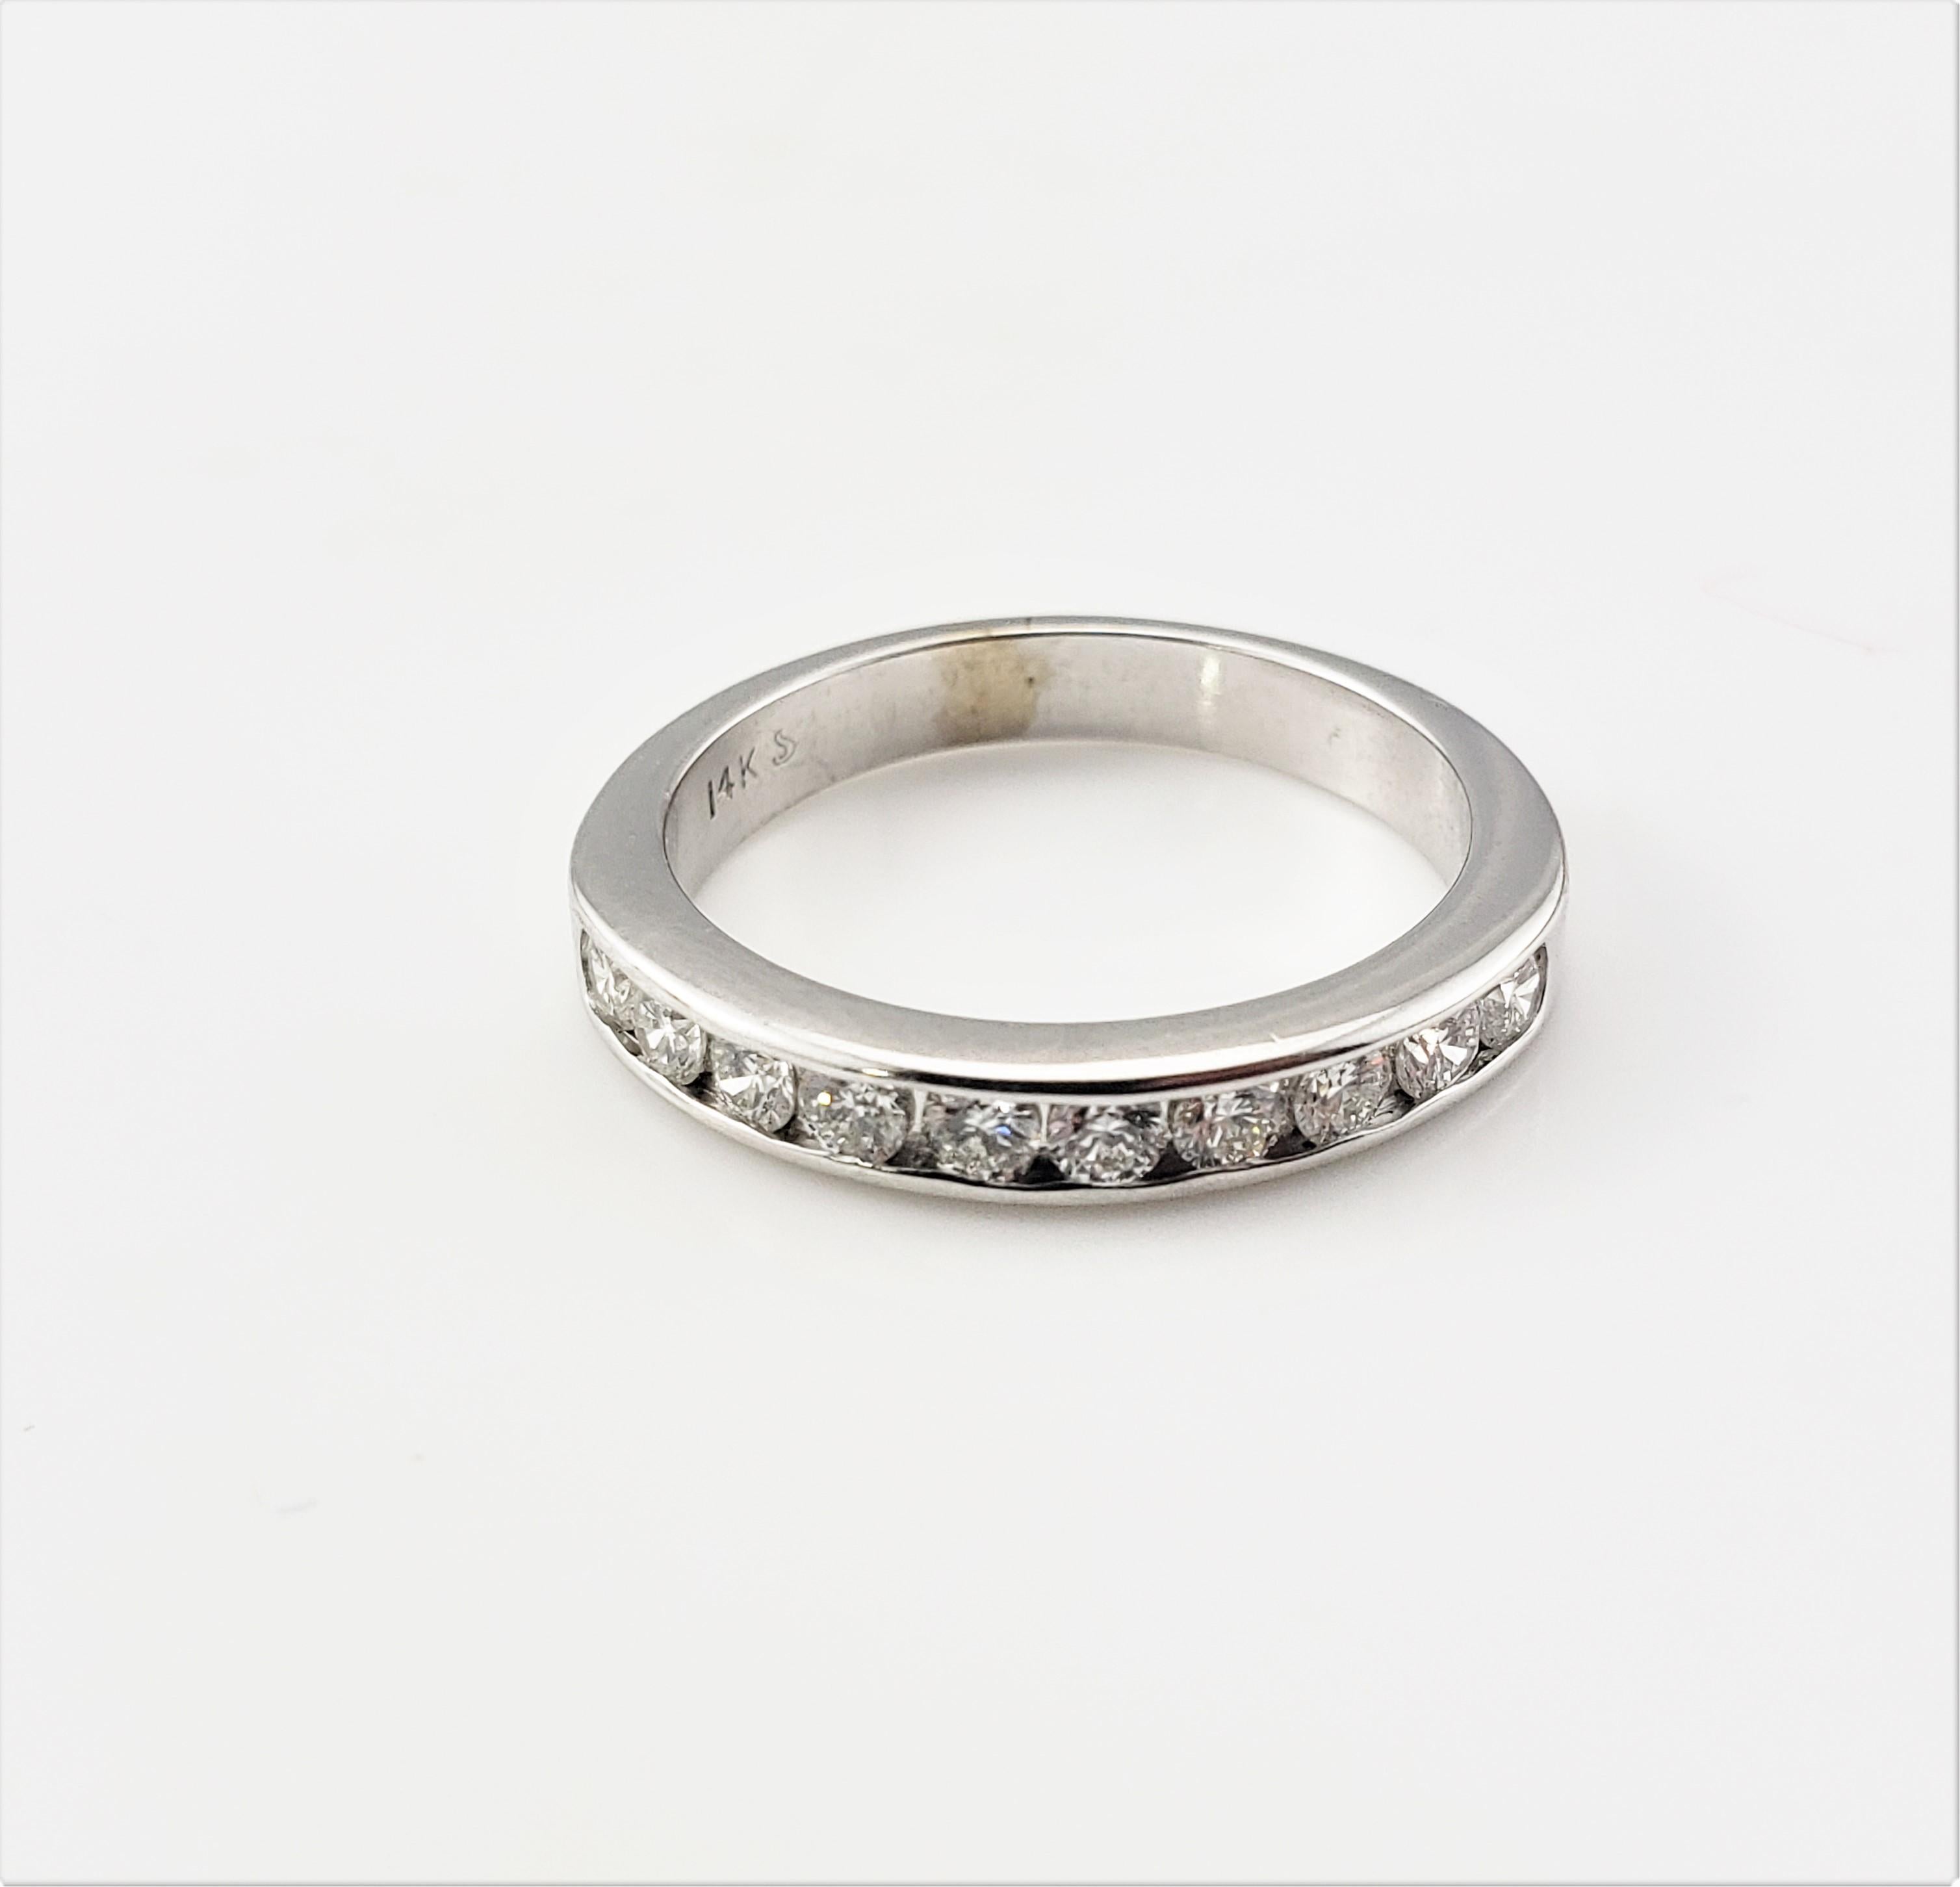 Vintage 14 Karat White Gold and Diamond Wedding Band Ring Size 7-

This sparkling wedding band features ten round brilliant cut diamonds set in classic 14K white gold. Width: 3 mm. Shank: 3 mm.

Approximate total diamond weight: .50 ct.

Diamond